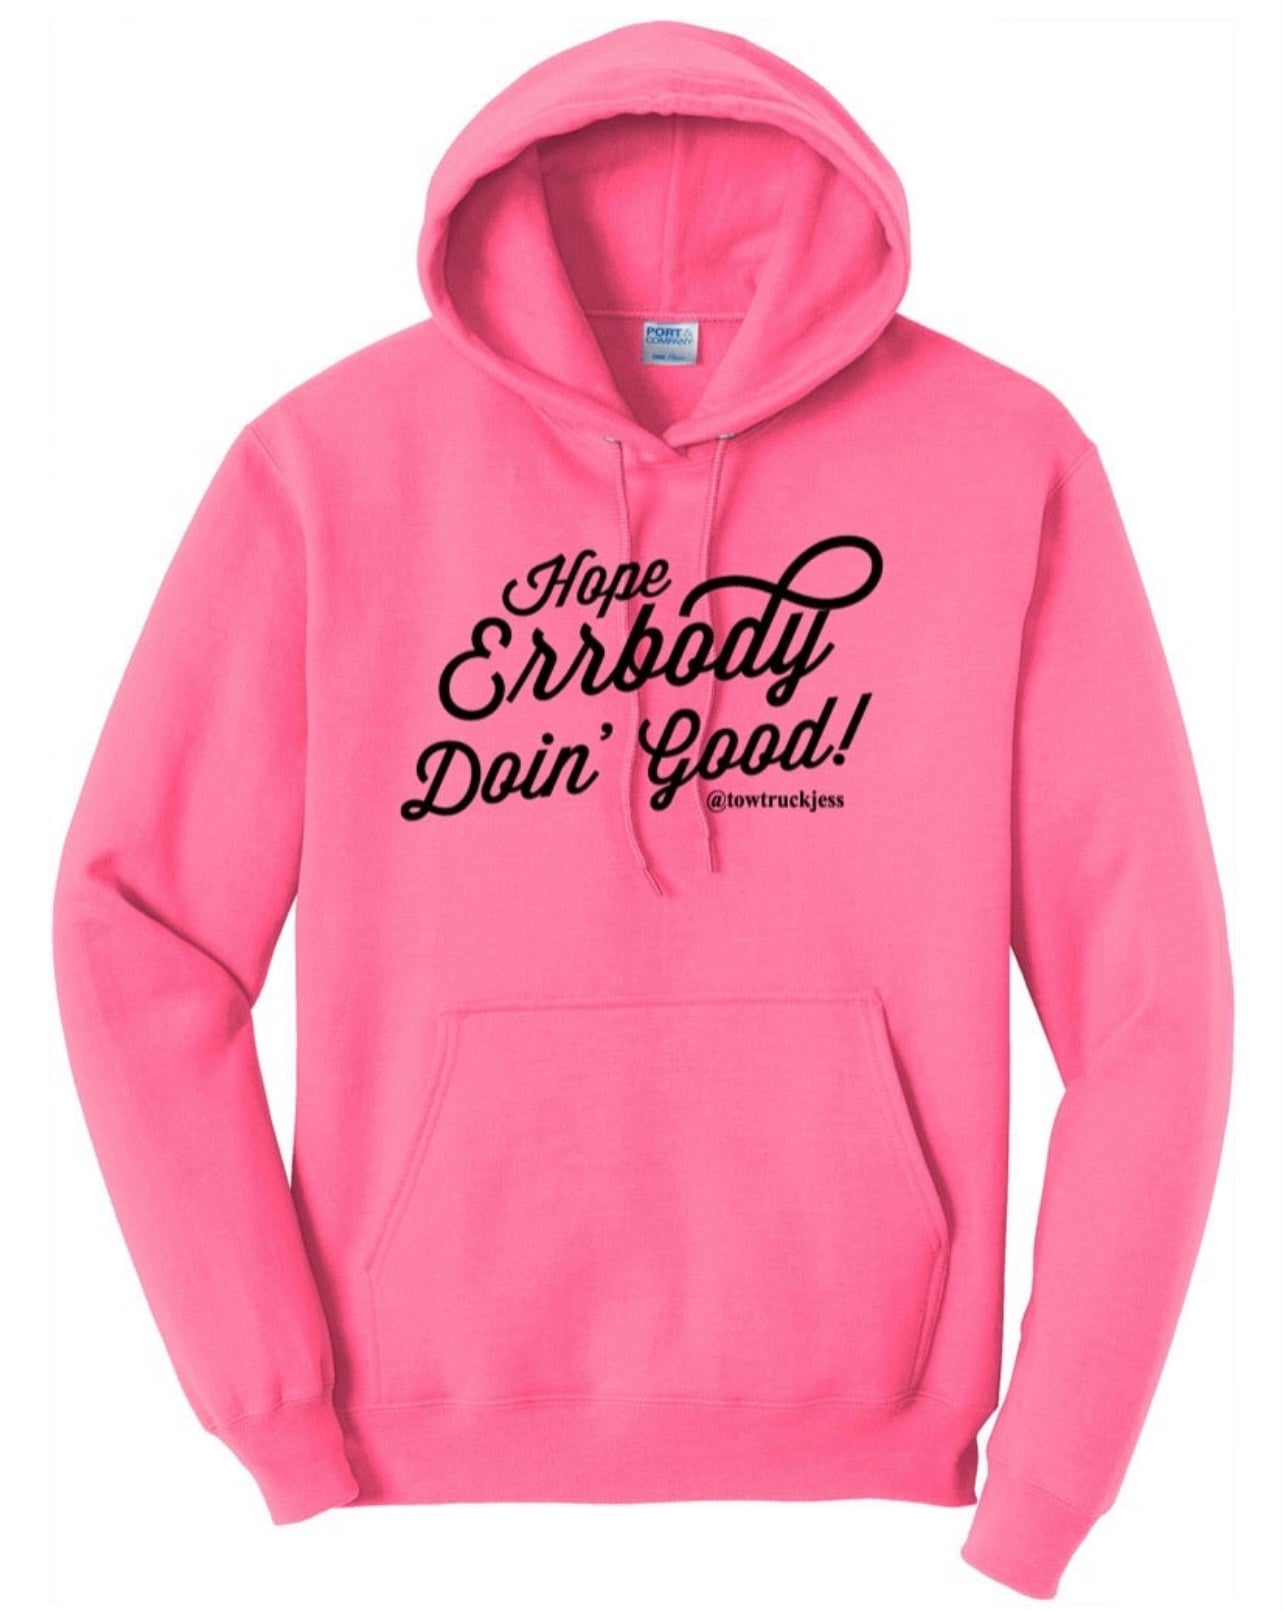 A BIG SAVE $10 OFF Pink with Black Logo Hope Errbody Doin’ Good Tow Truck Jess Hoodie *WHILE SUPPLIES LAST*